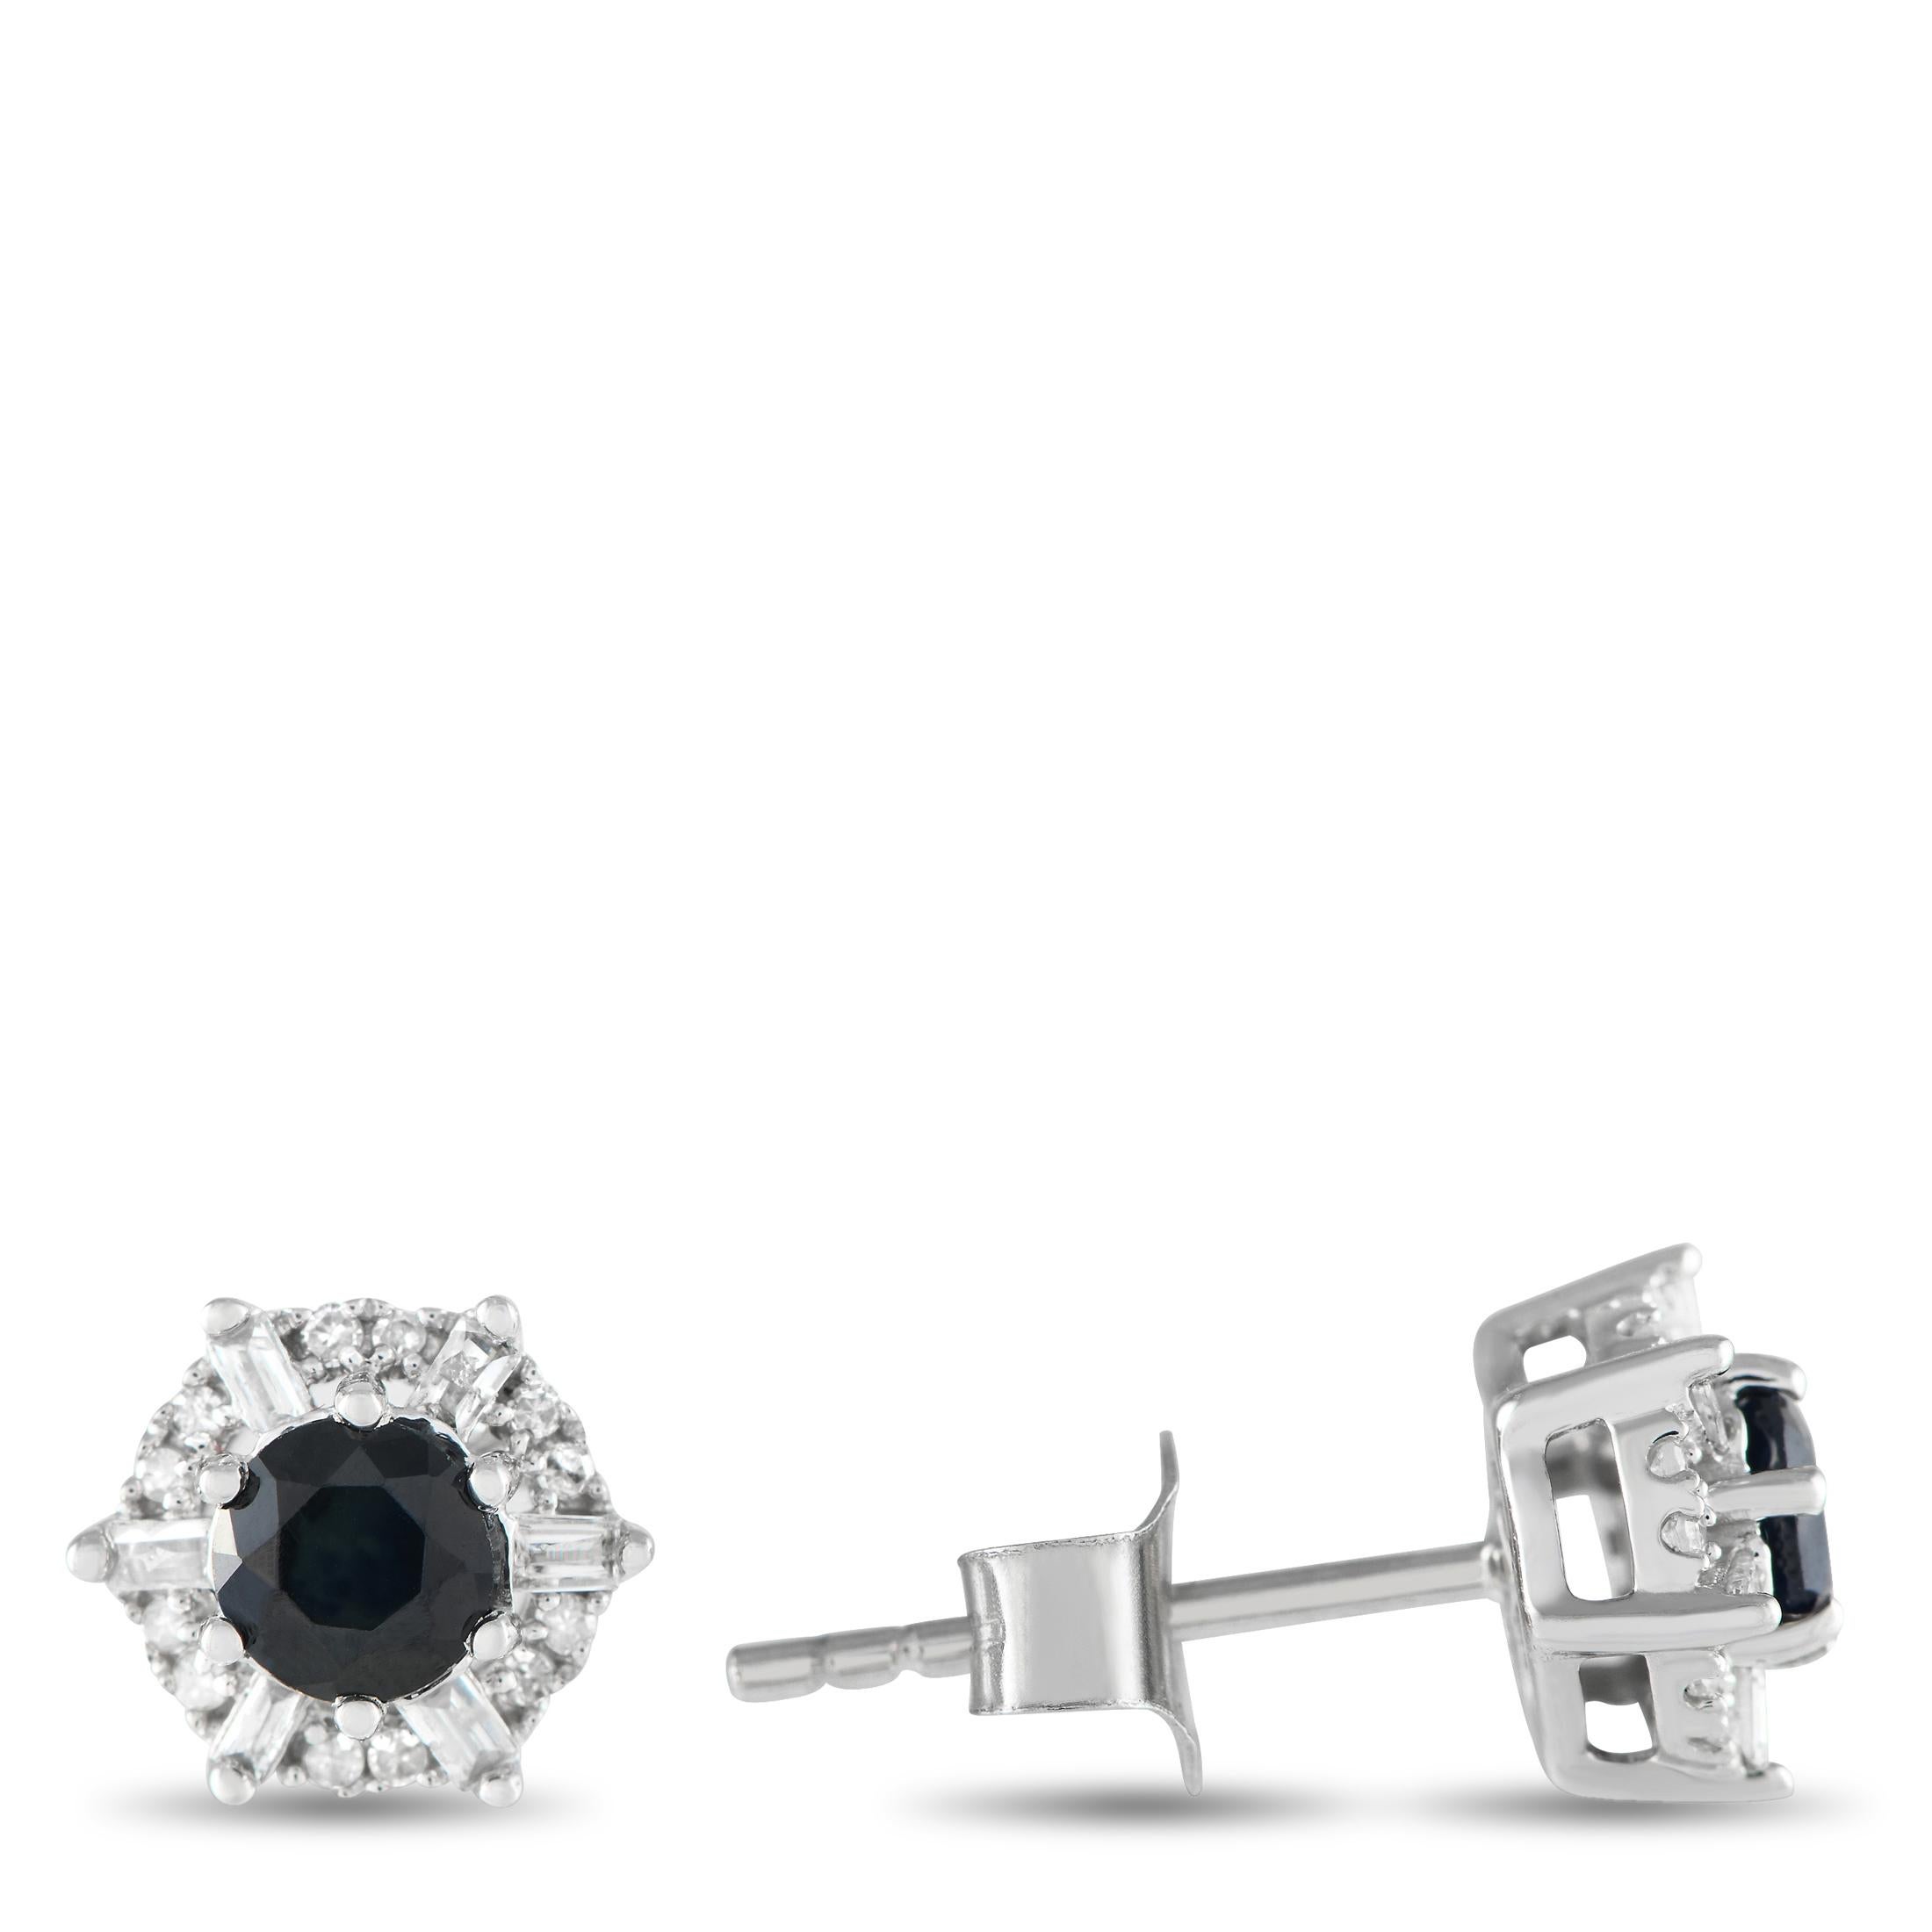 These earrings are petite enough for daily wear. They feature a sapphire center stone held securely by six prongs. An alternating pattern of baguette diamonds and round diamond duos surround the deep blue central gemstone. Each earring measures